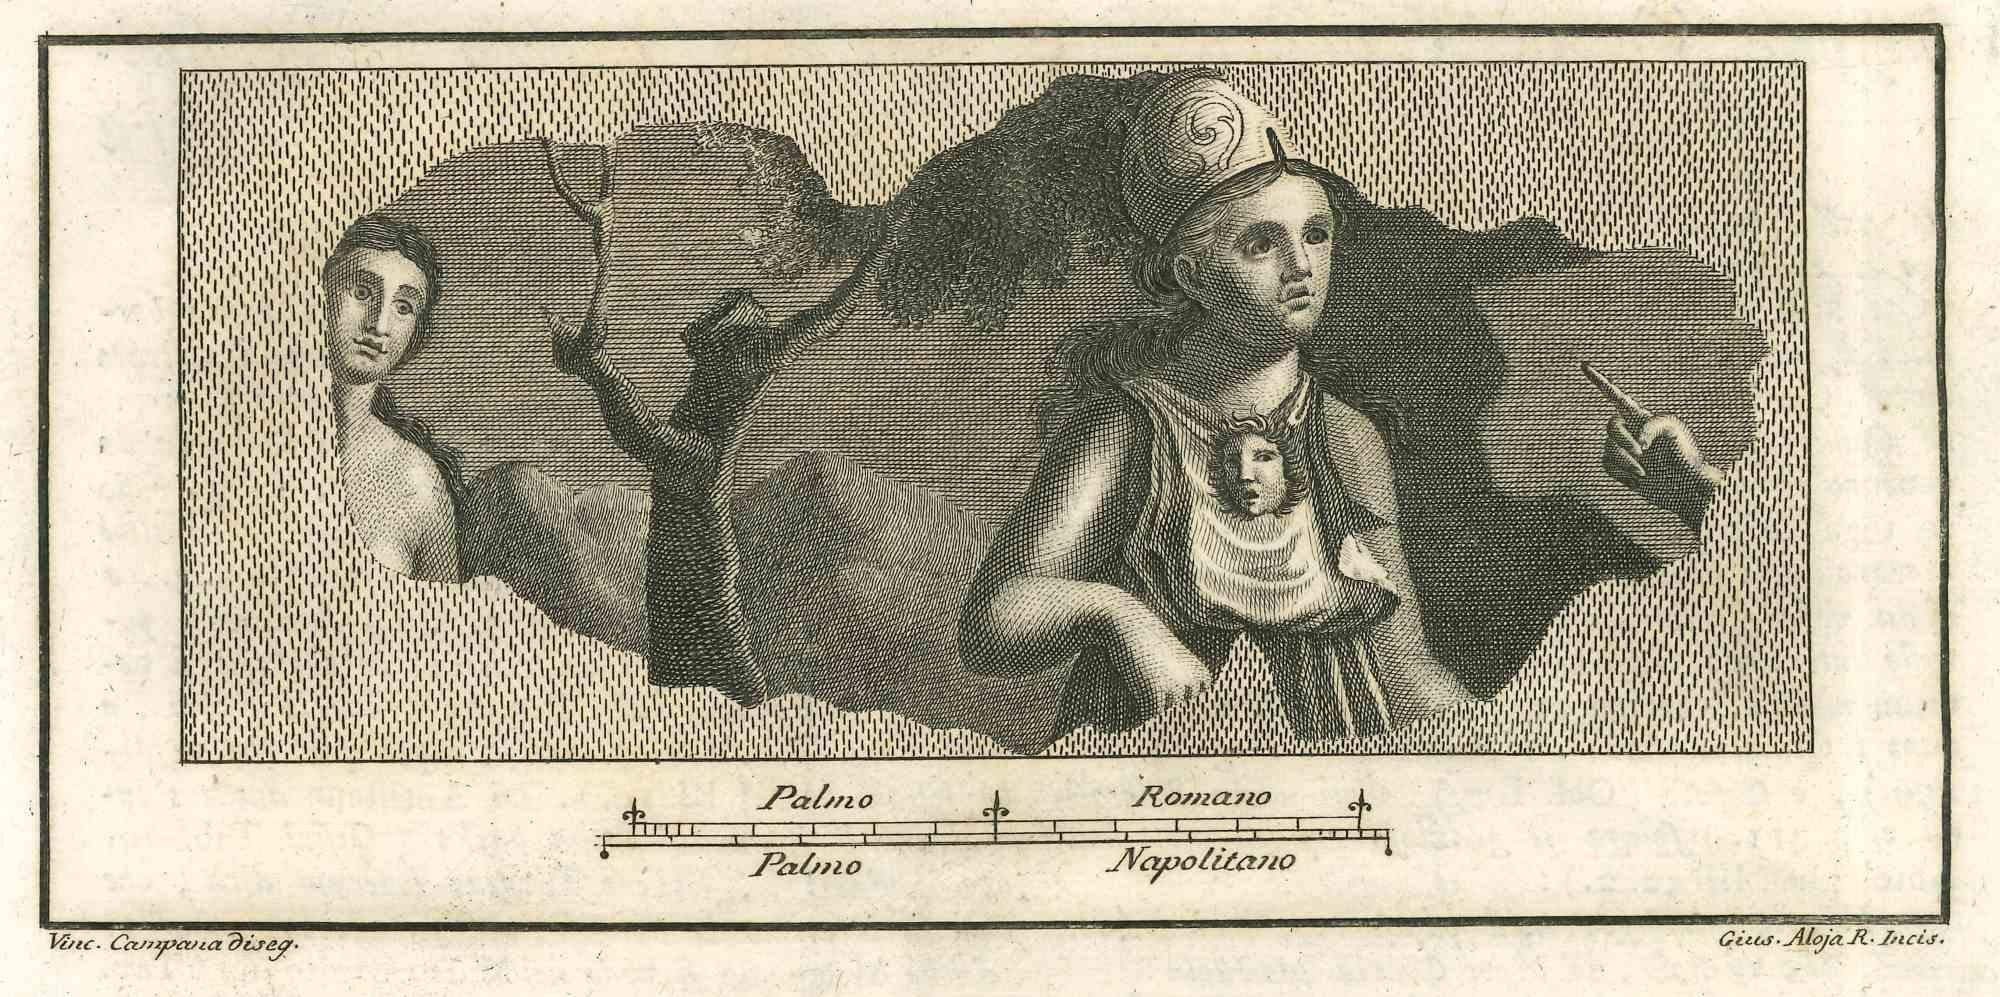 Pompeian Fresco from "Antiquities of Herculaneum" is an etching on paper realized by Giuseppe Aloja in the 18th Century.

Signed on the plate.

Good conditions with slight folding.

The etching belongs to the print suite “Antiquities of Herculaneum